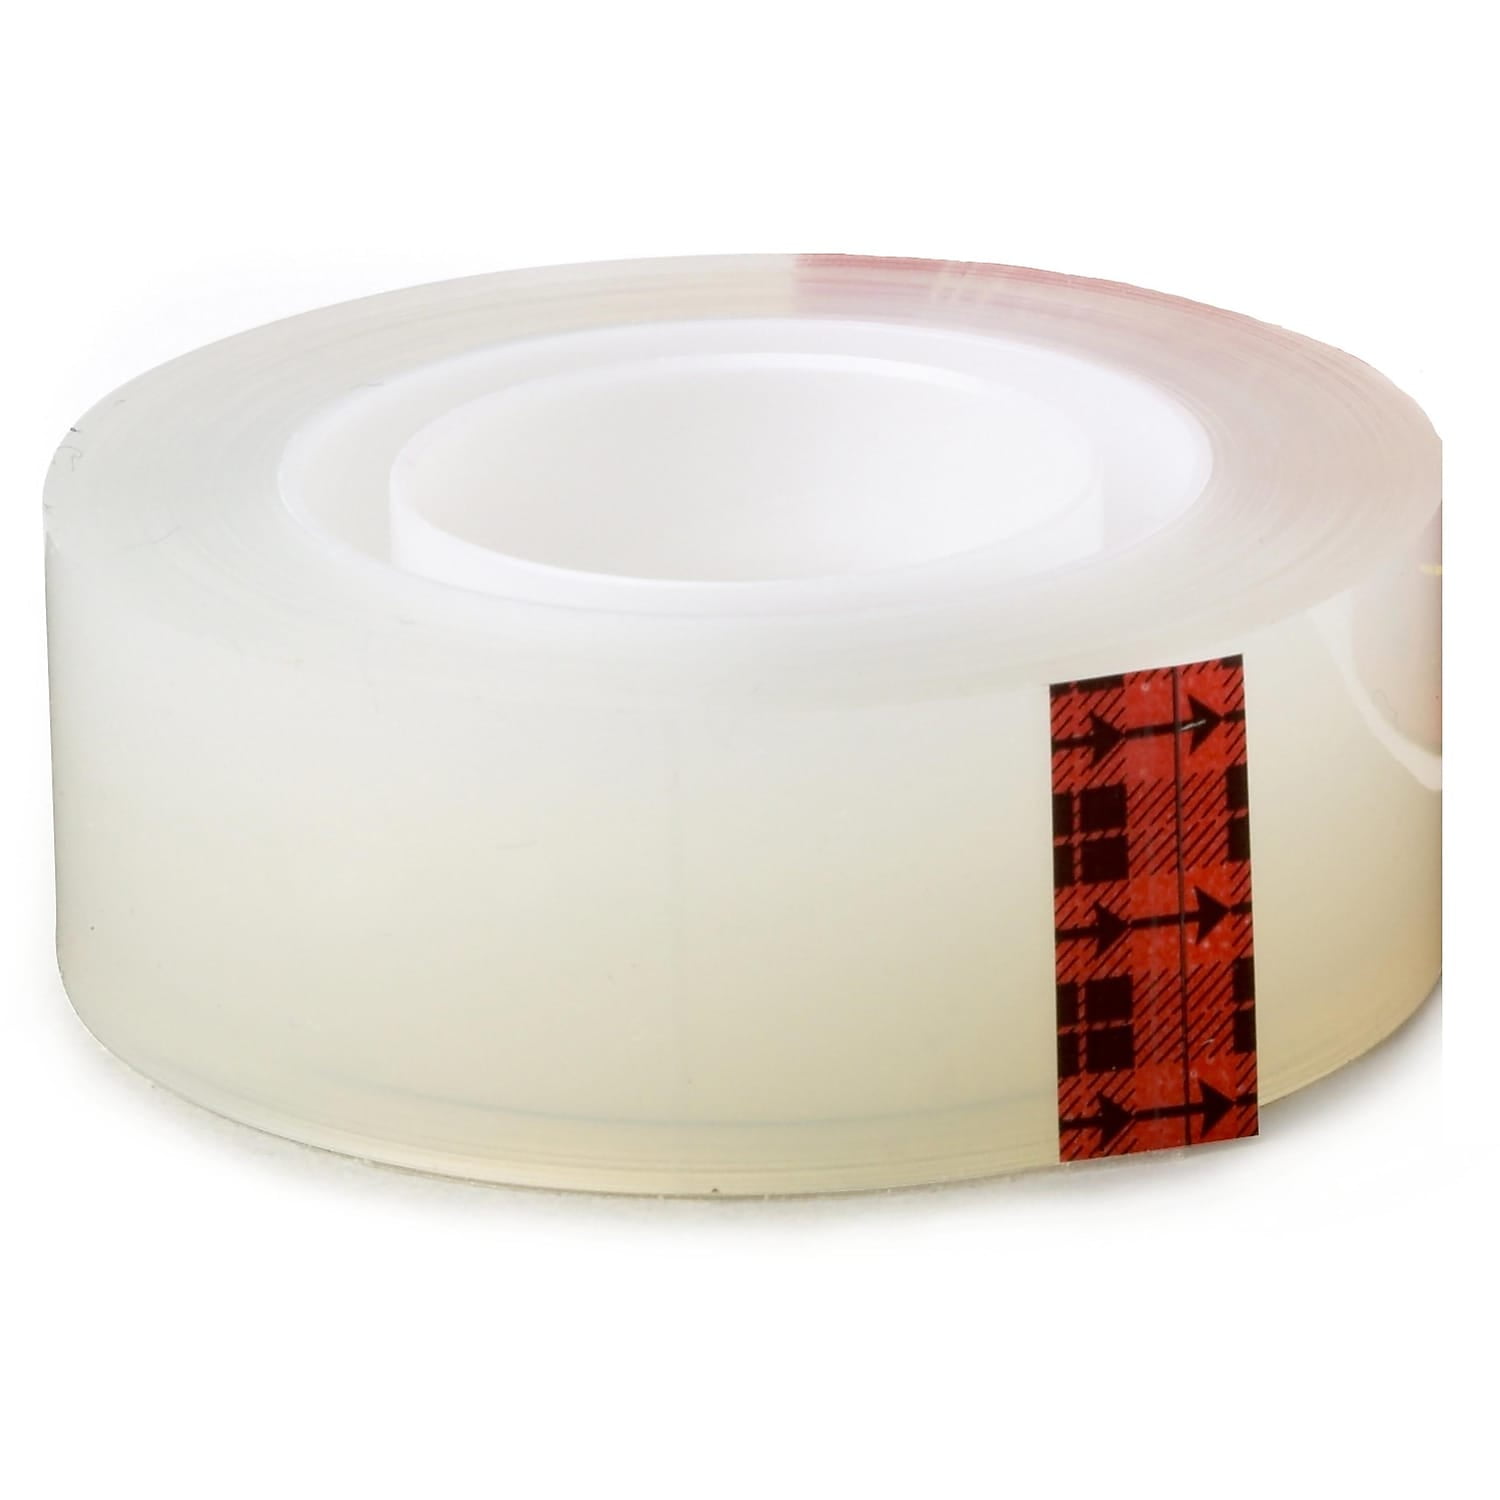 Pen+Gear Double Sided Tape, Clear, 1/2 x 400, 1 Roll with Dispenser 